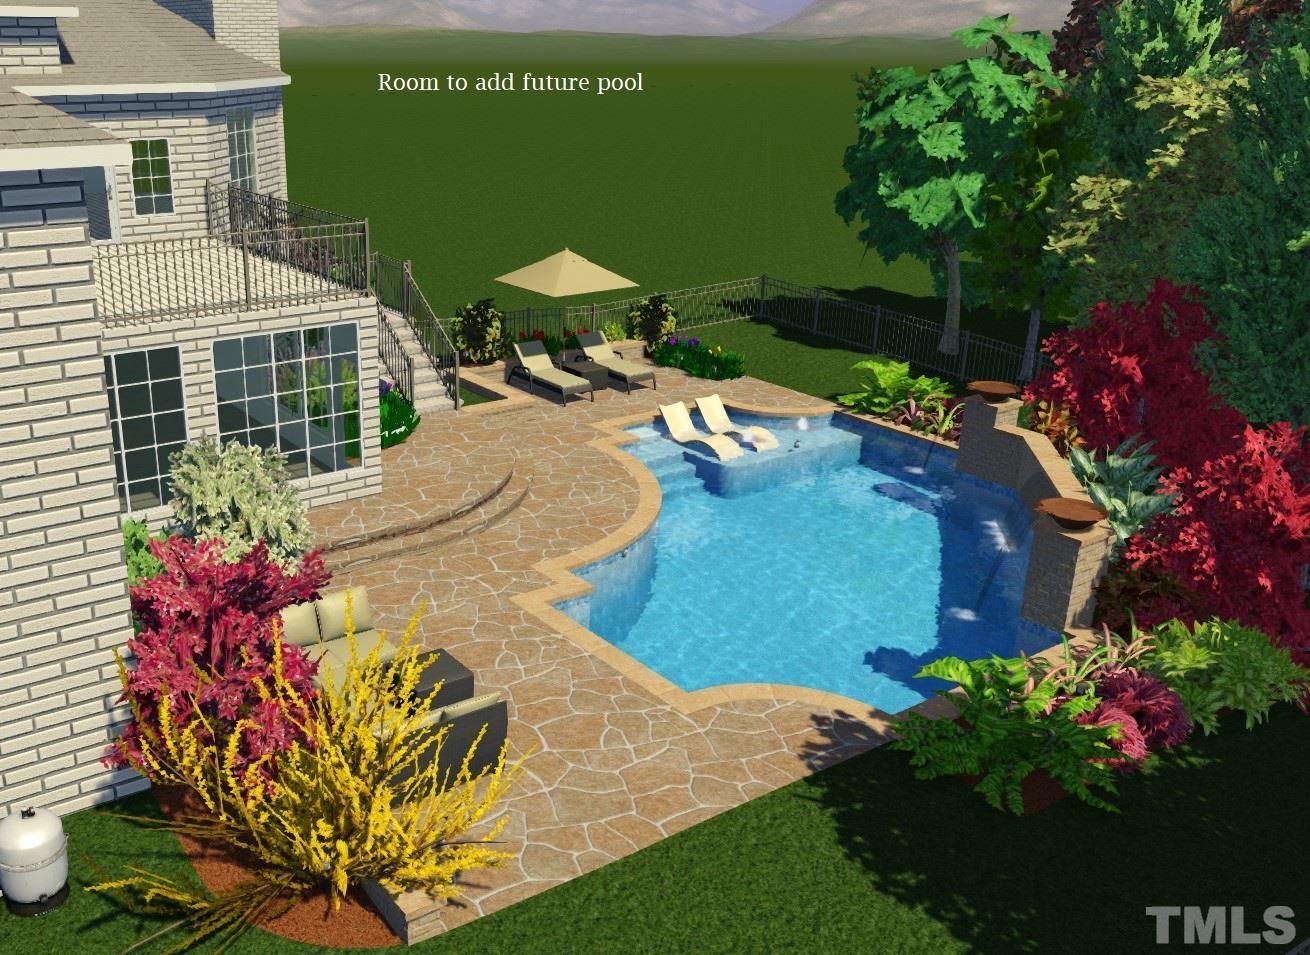 Room for a pool. Future Pool rendering